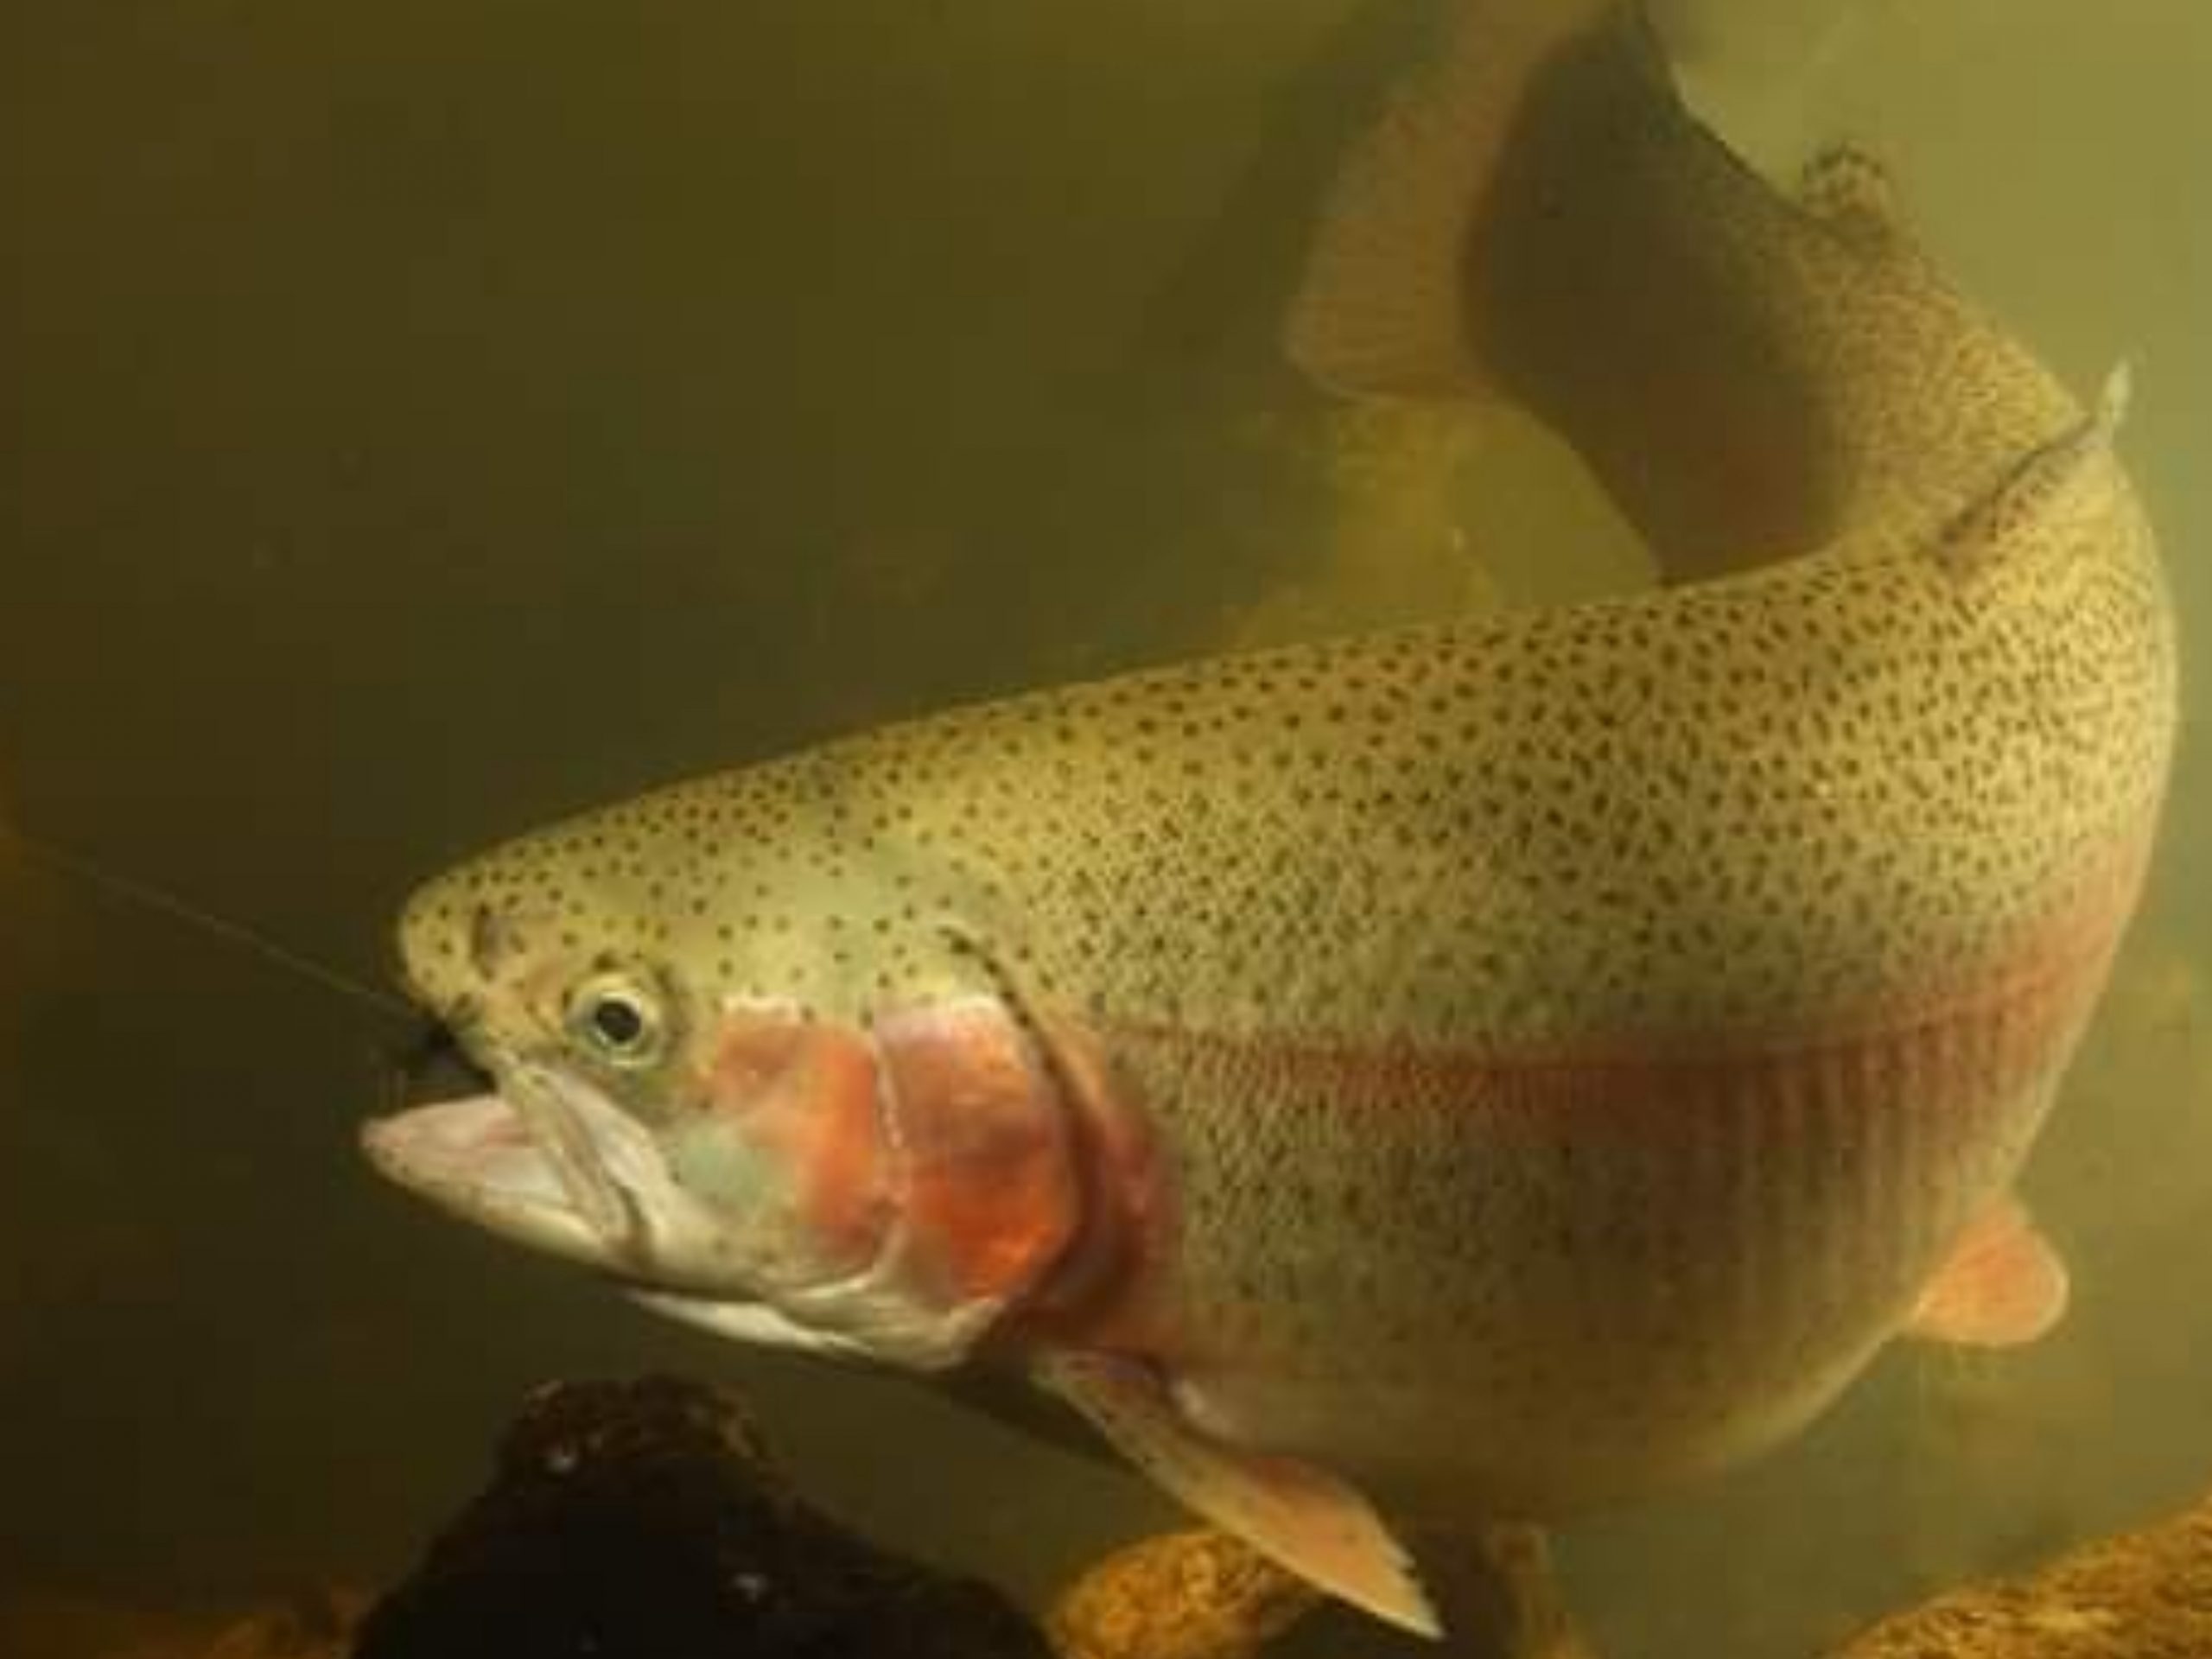 Ohio Mark Your Calendars, Local Rainbow Trout Release Dates Announced